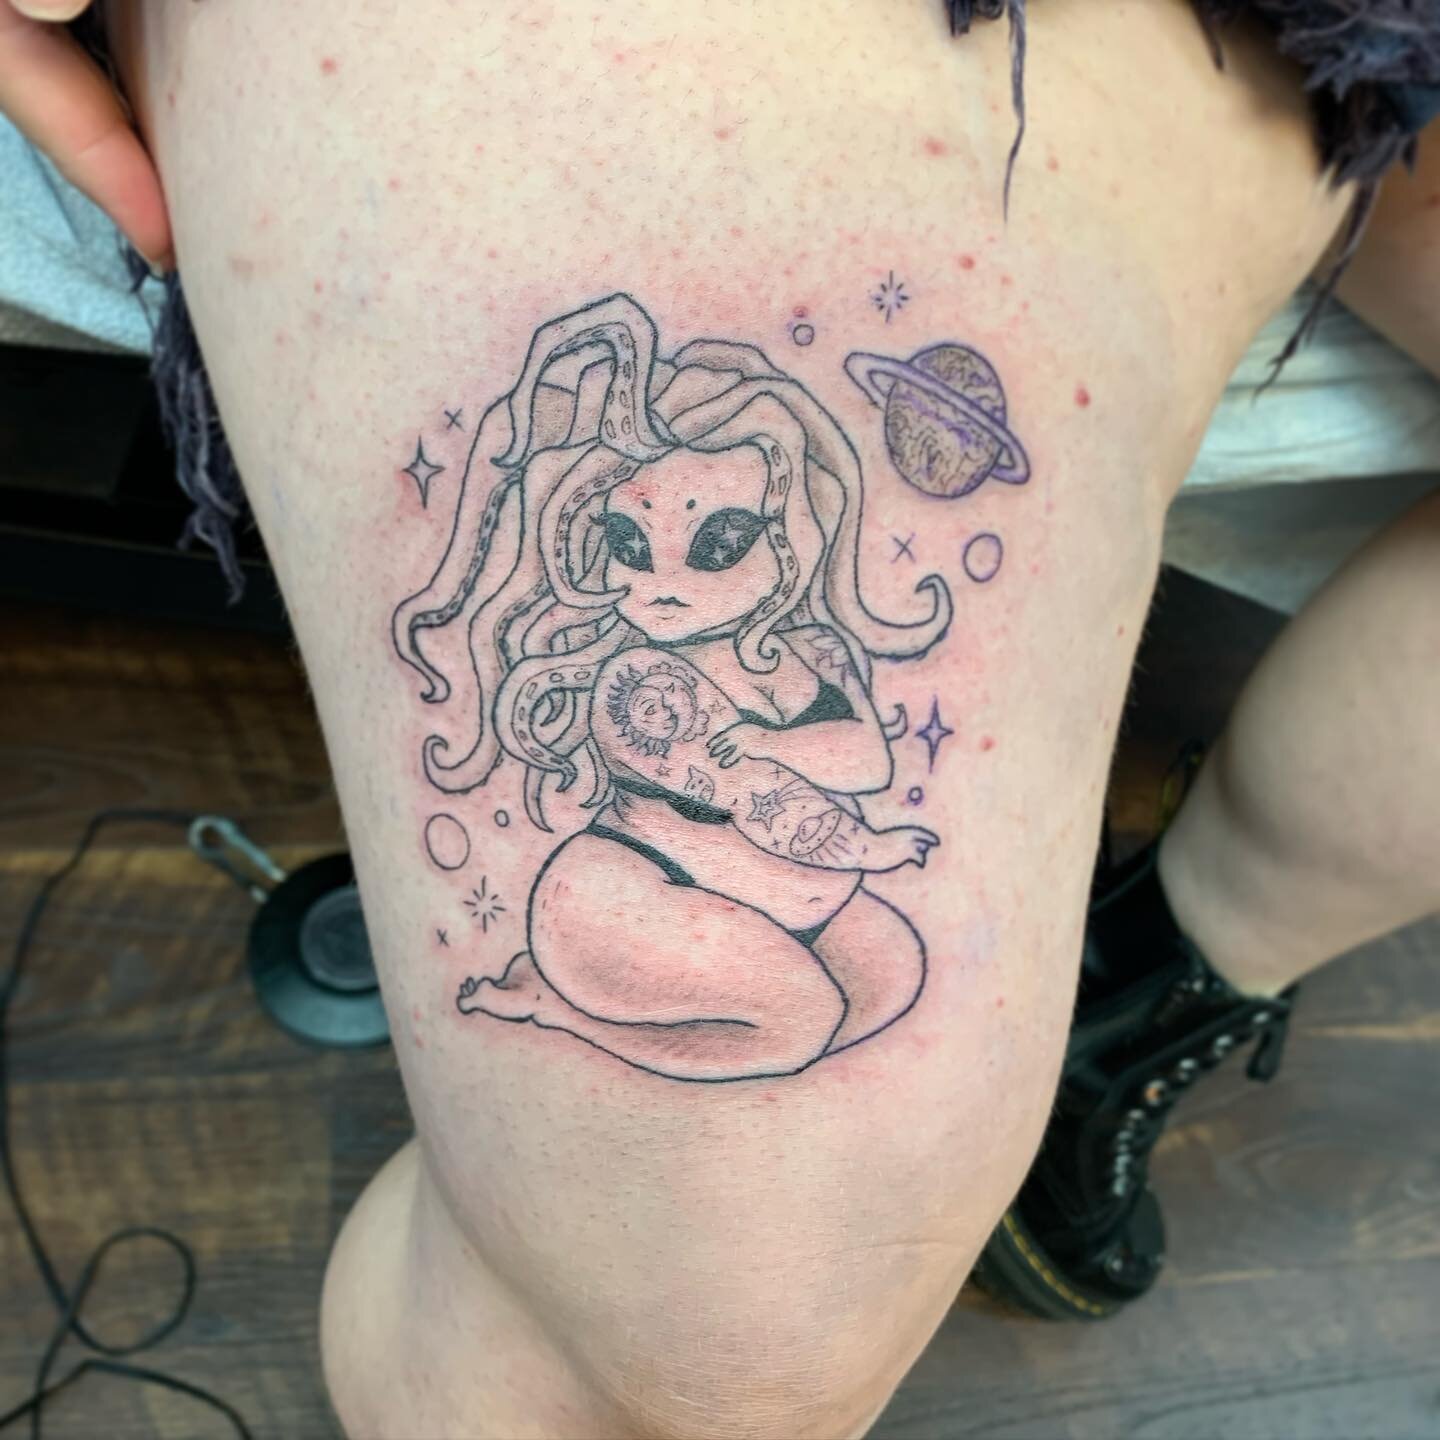 🚨SPACE BABE ALERT🚨 aliens are real and I hope they look like this ✨ would love to do more pinups and character work
.
.
.
.
.
#tattoo #aliensarereal #alienbabe #spacebabe #pinuptattoo #pinup #michigantattooartist #michigantattooers #michiganmade #s